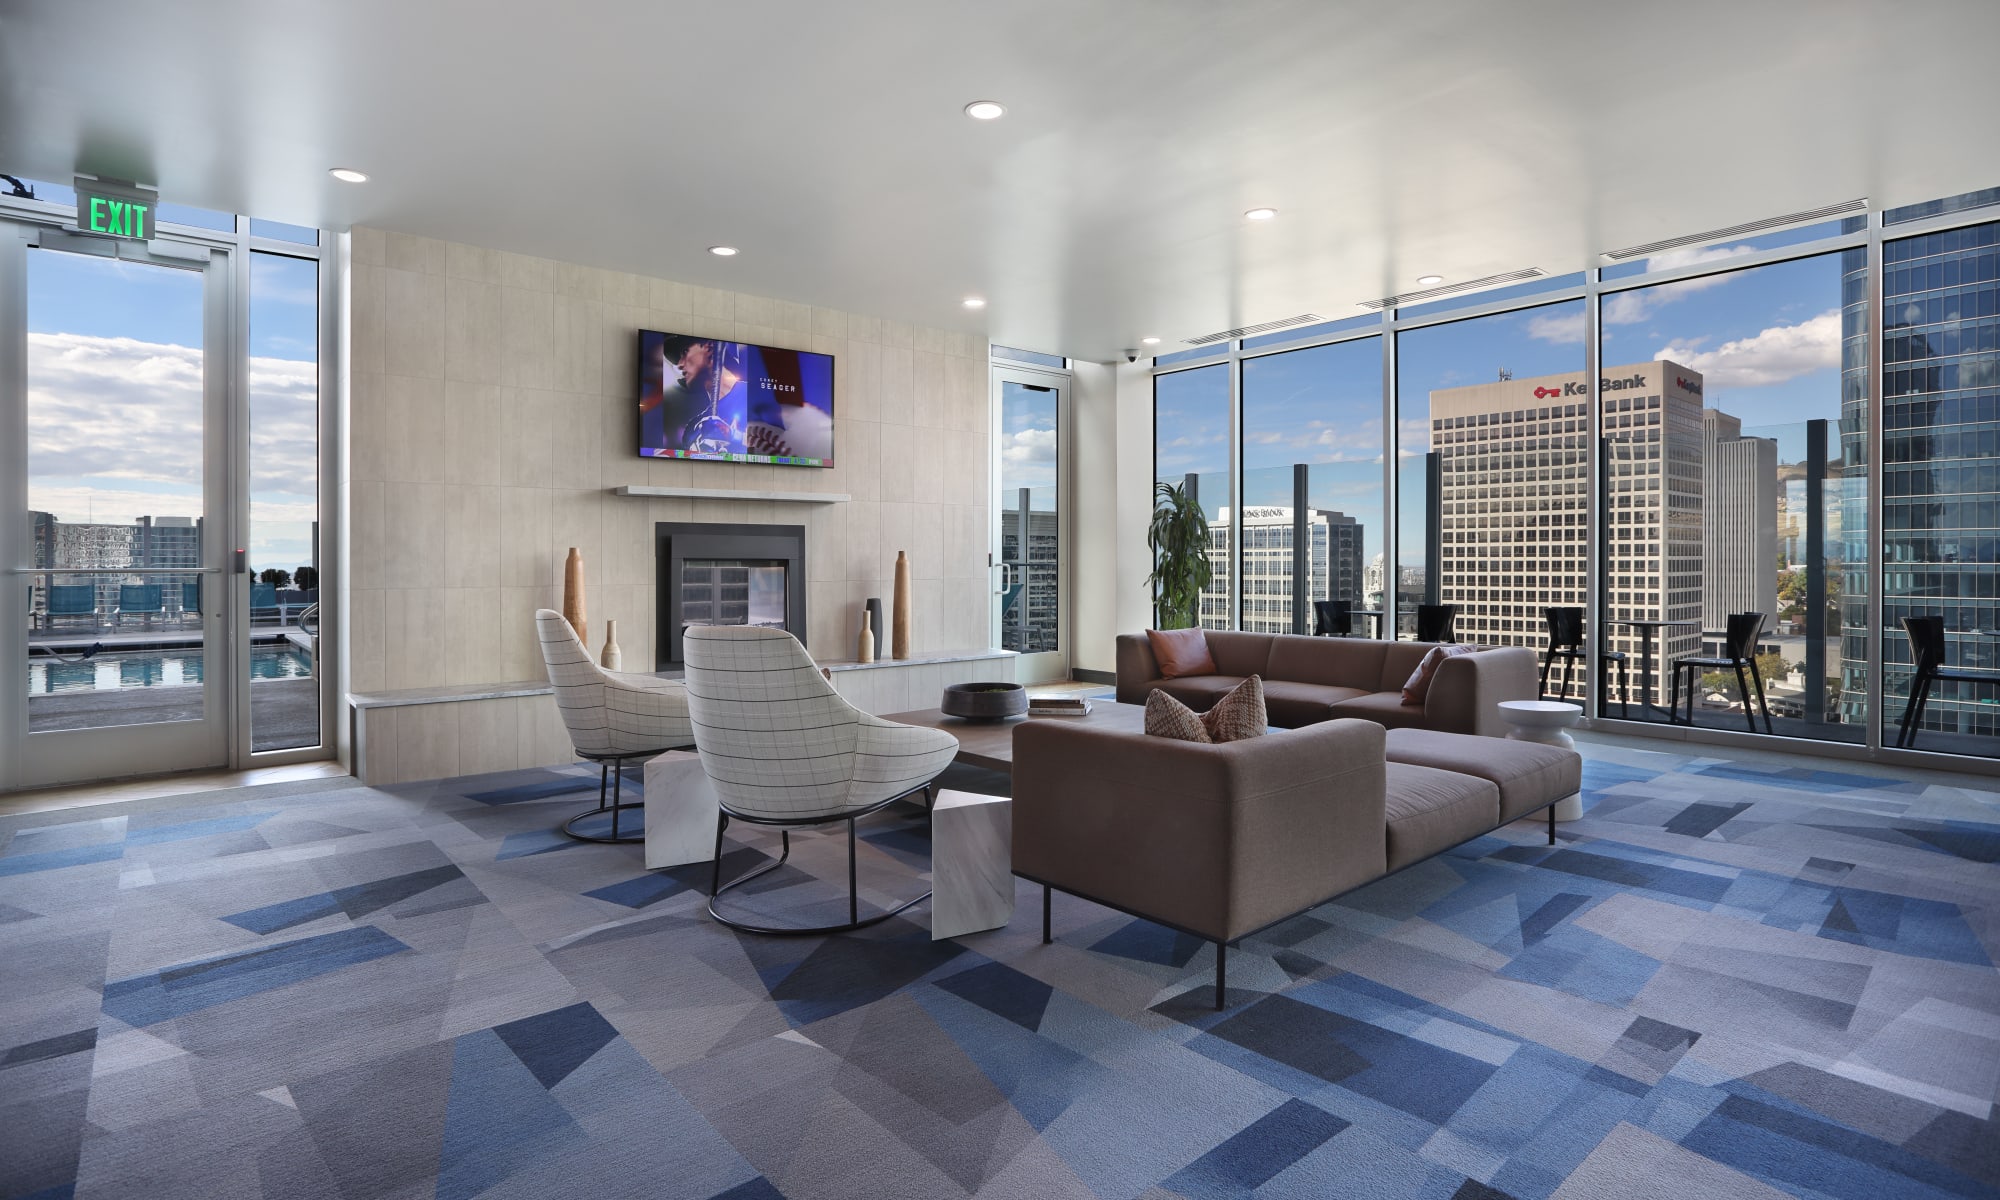 Rooftop clubroom with fireplace and television of Liberty SKY in Salt Lake City, Utah